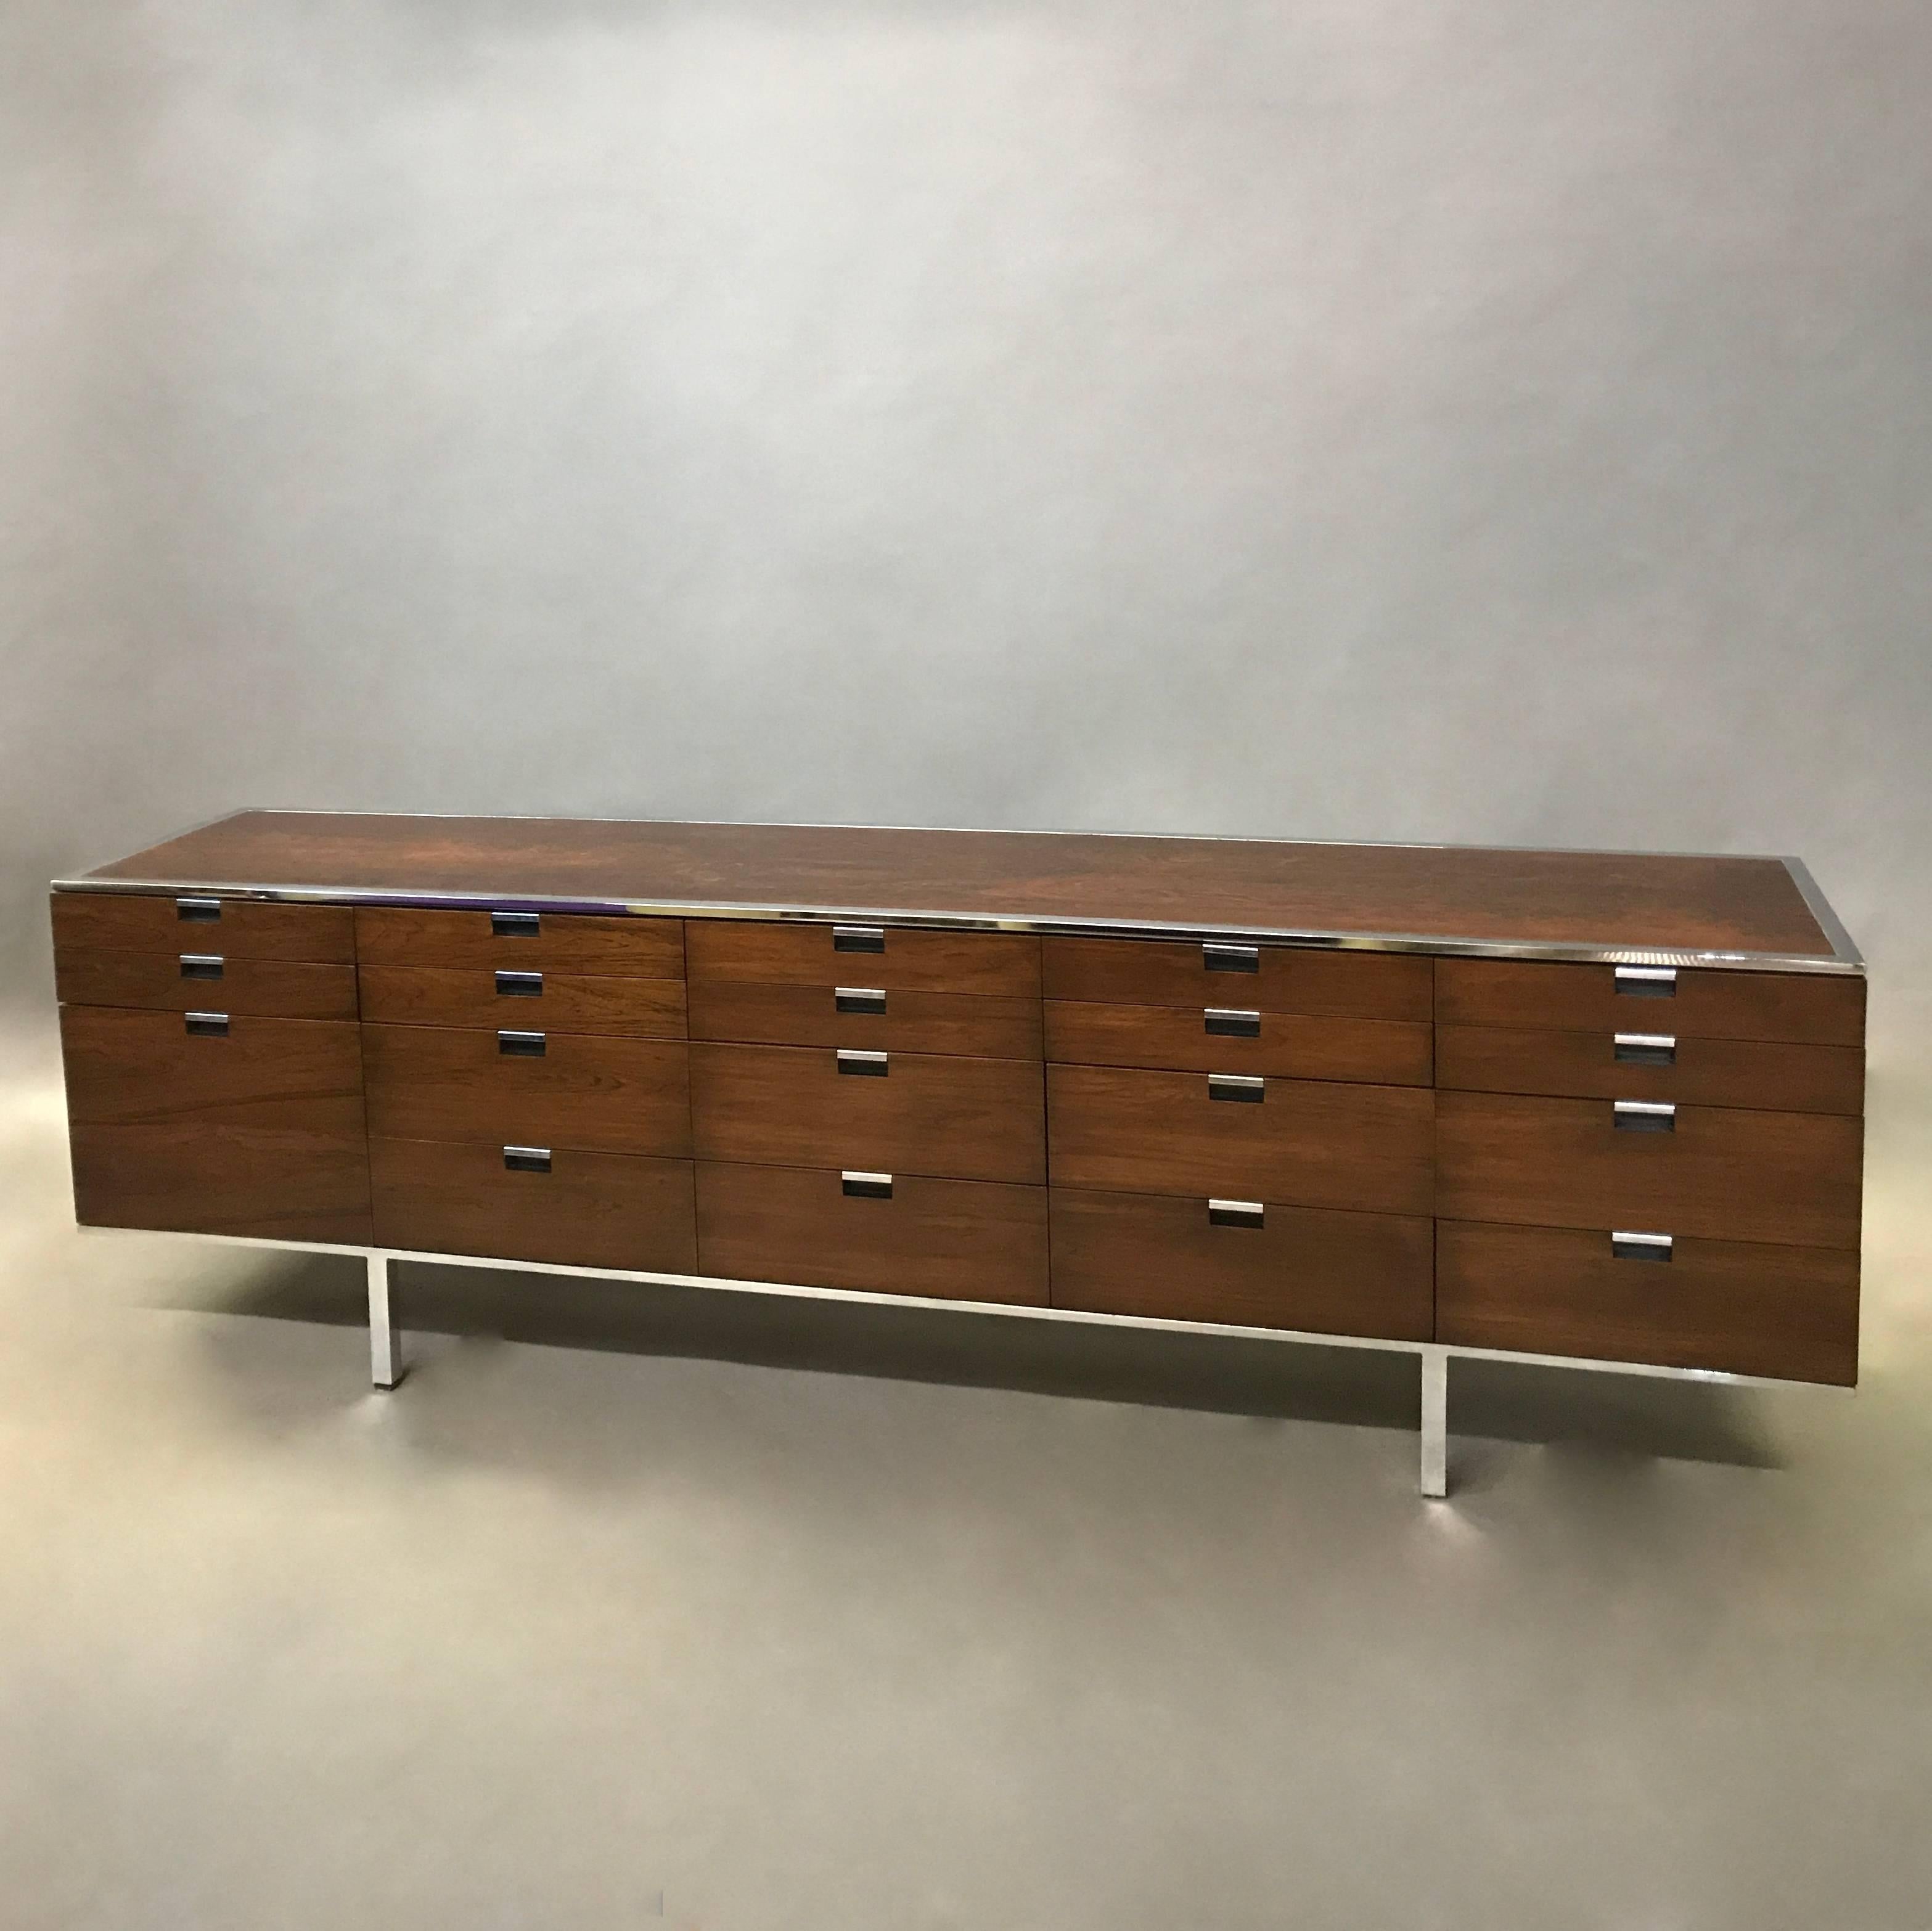 Long, sleek, rosewood credenza designed by Roger Sprunger for Dunbar features a chrome frame and recessed pulls on it's 19 drawers of various size.